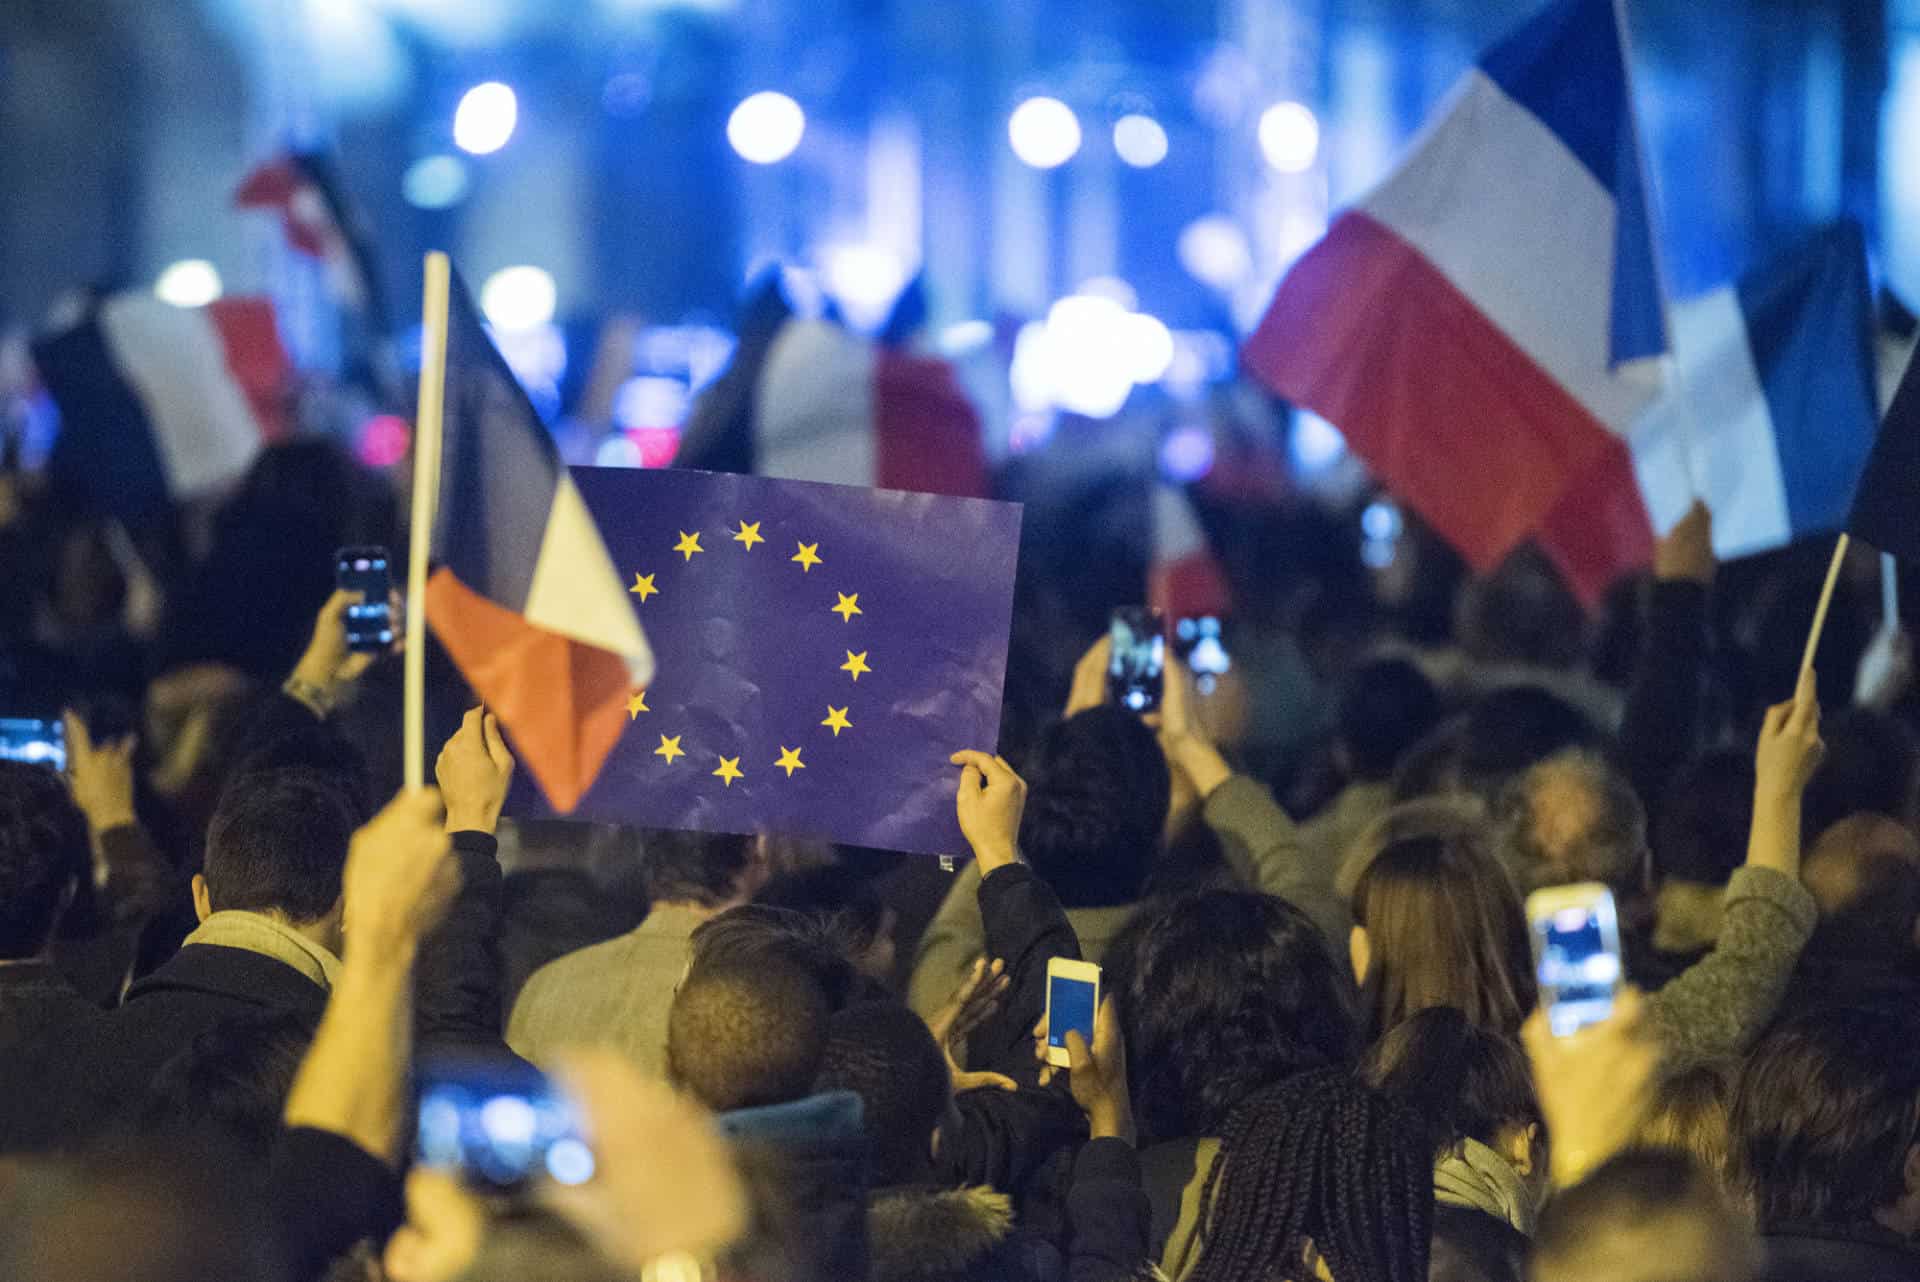 Europe and France flags being waved by crowd at political event in Paris